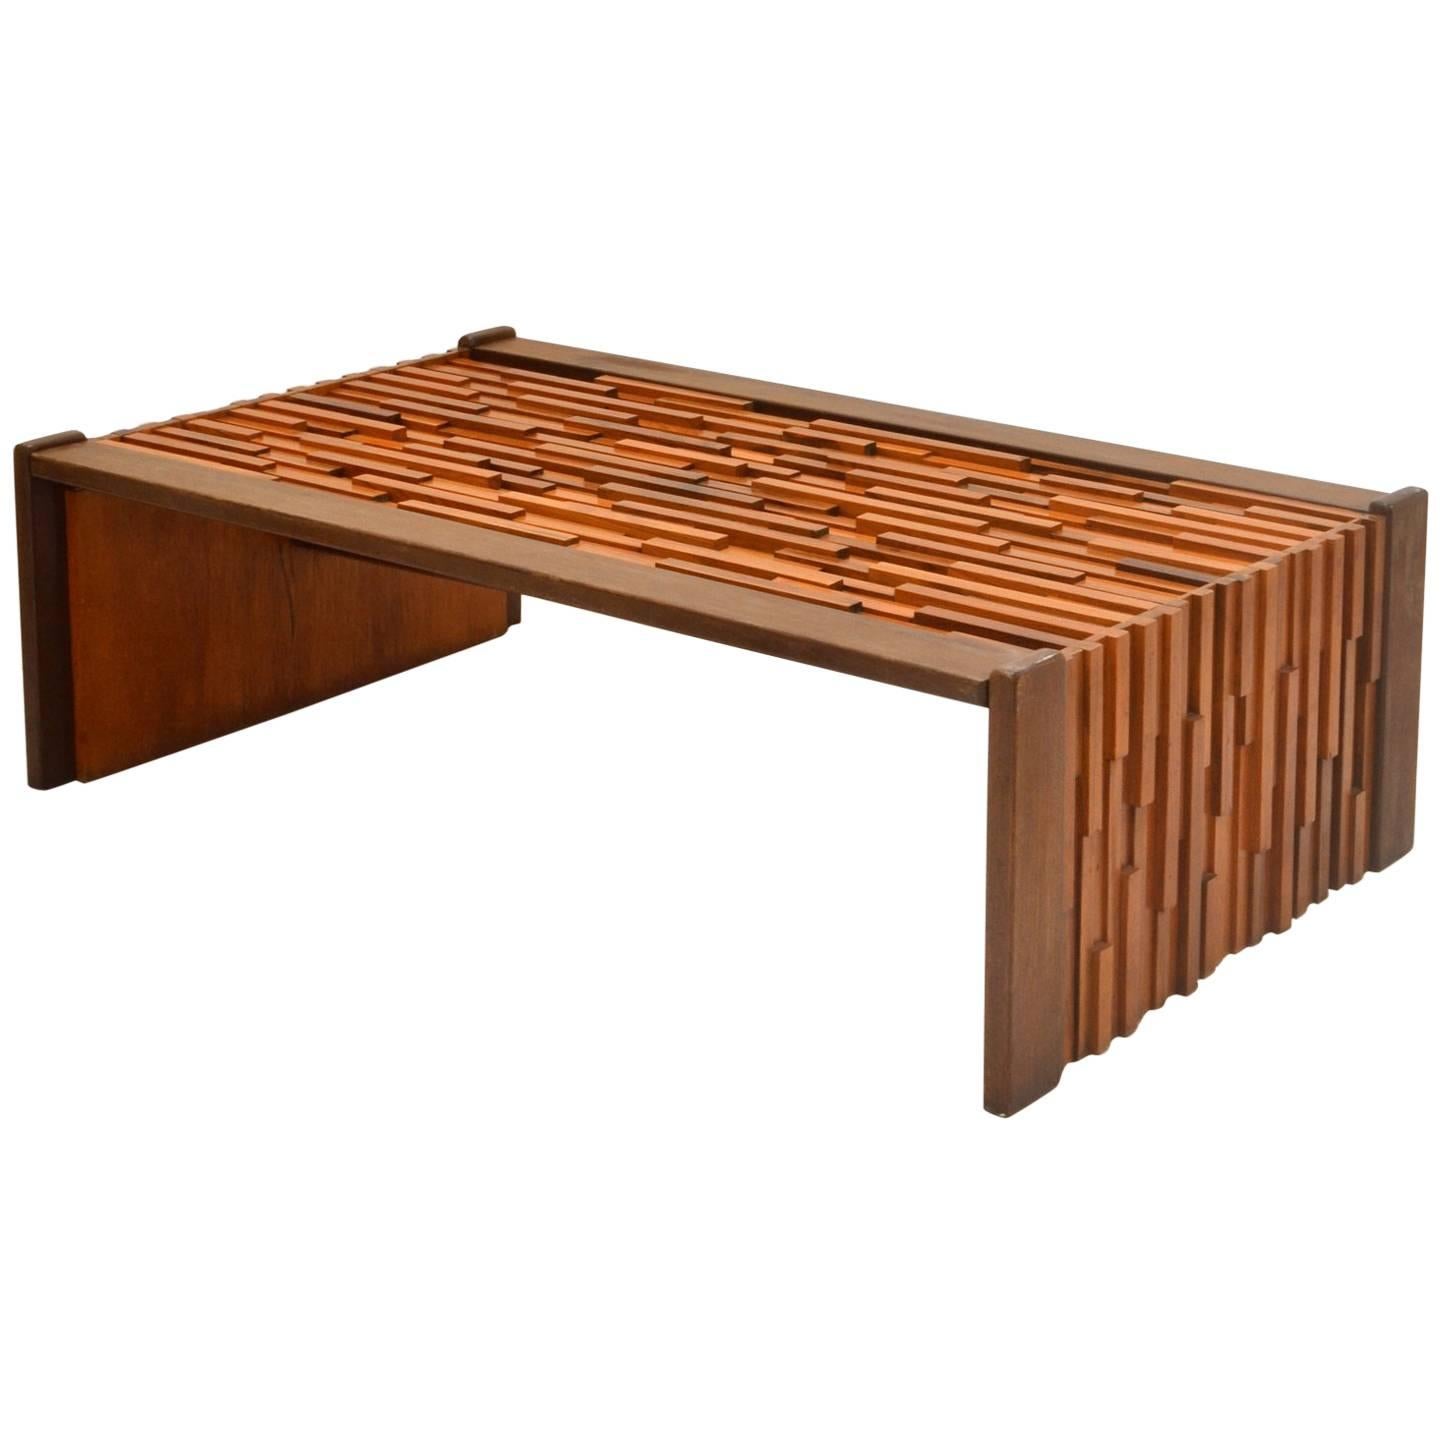 Brazilian coffee table designed as a sculptural relief of various tropical hardwoods in different heights and lengths to create a Brutalist effect edged with mahogany and fitted glass top. The table is made in Brazil by Percival Lafer. Table and